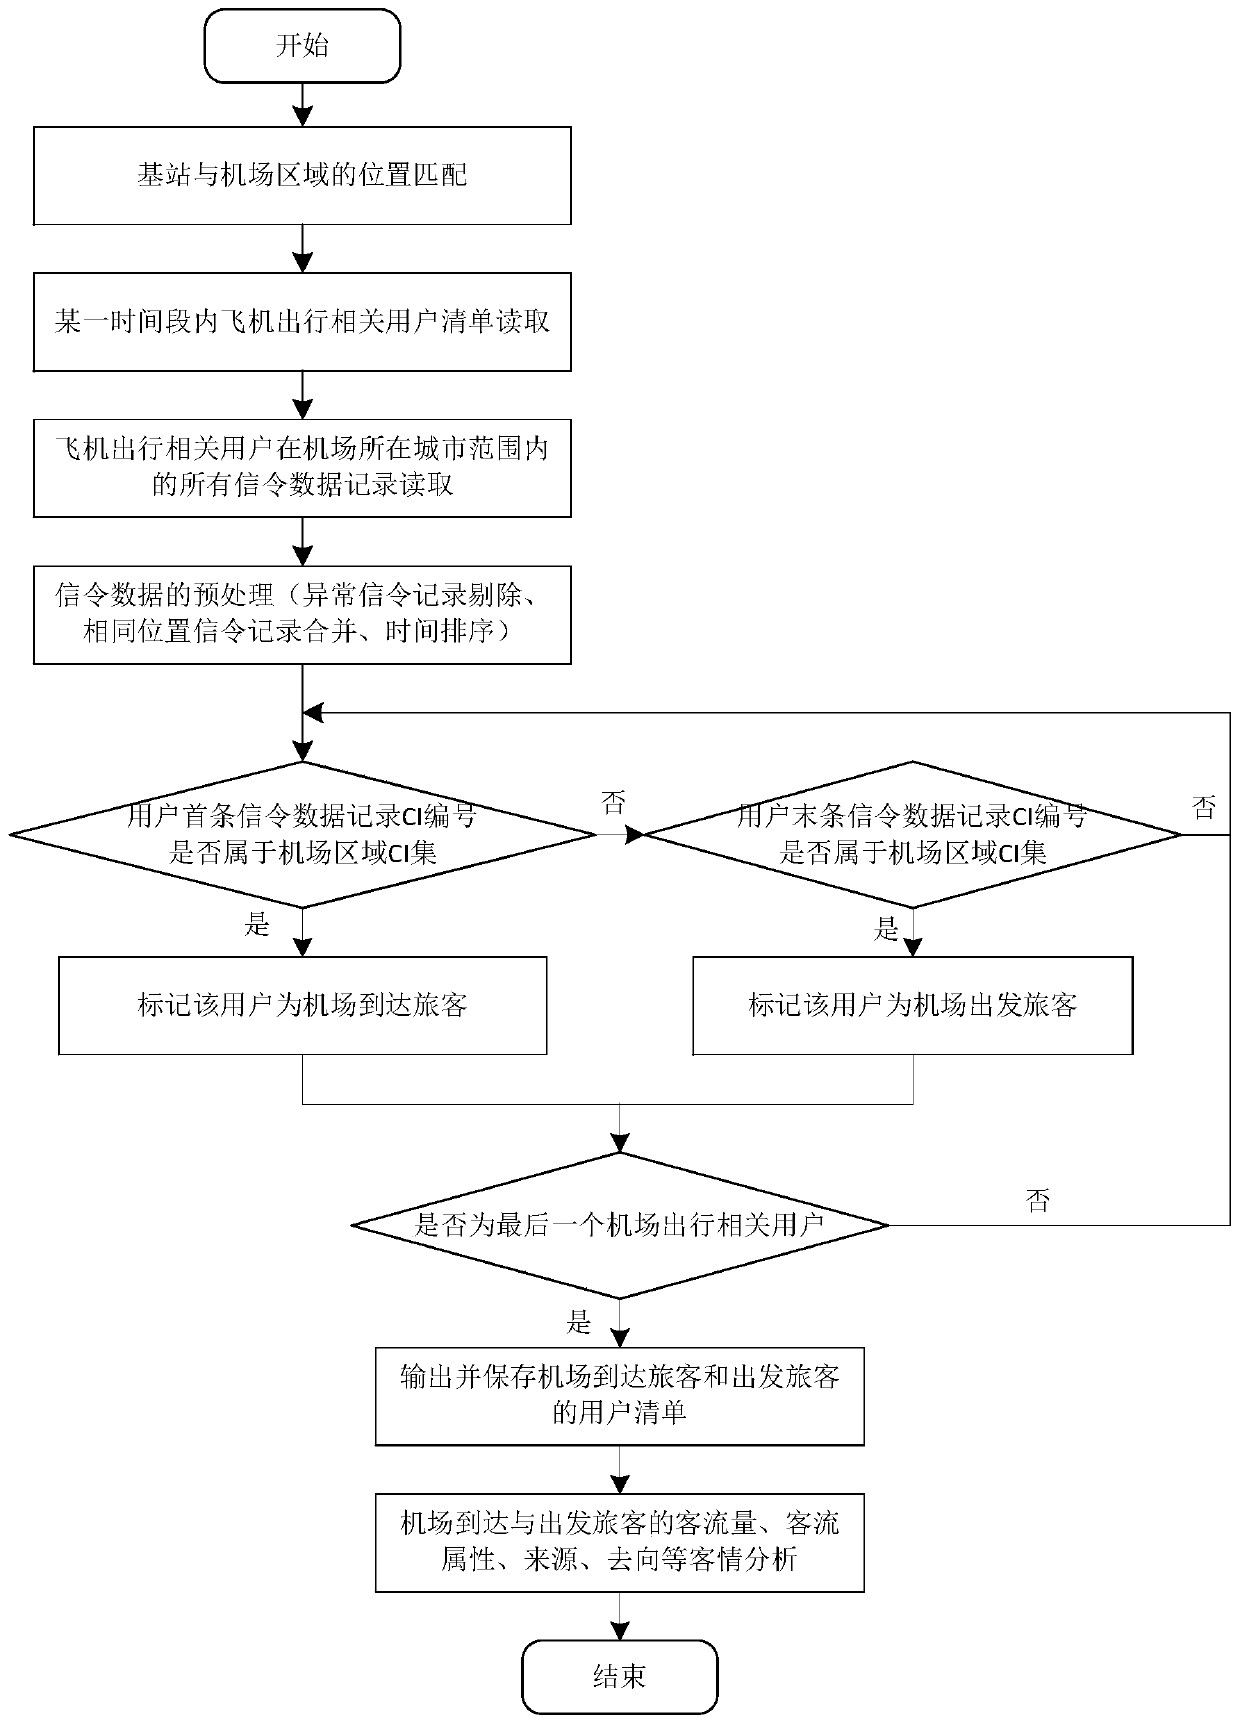 Airport arrival and departure passenger identification and passenger condition analysis method based on mobile phone signaling data